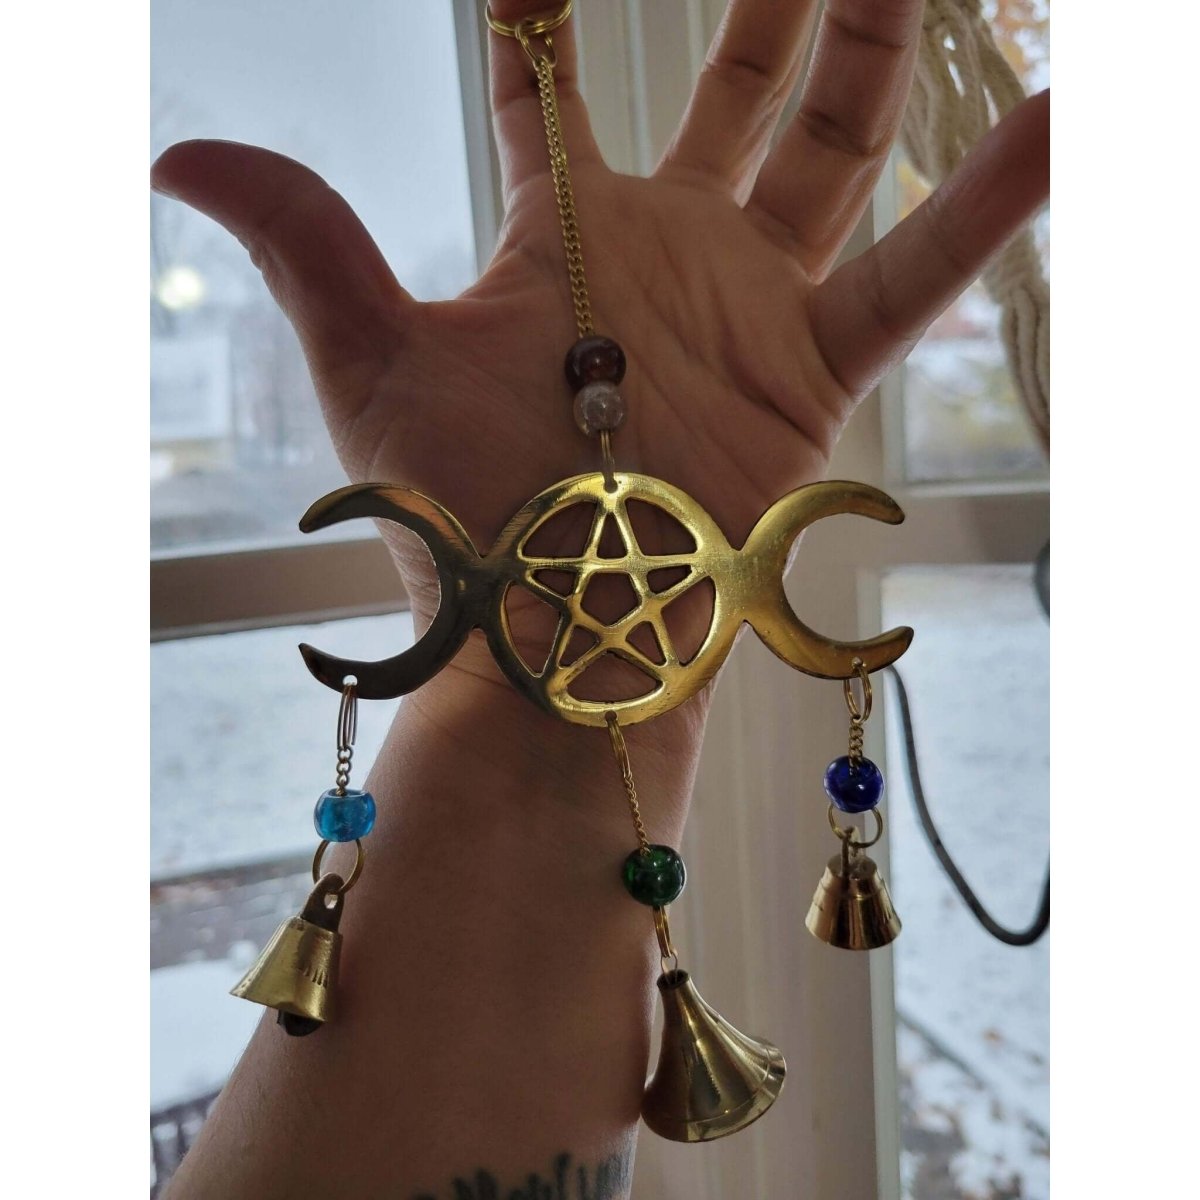 Witches bells protection rule of three with black salt and pentagram on  grape vine wreath